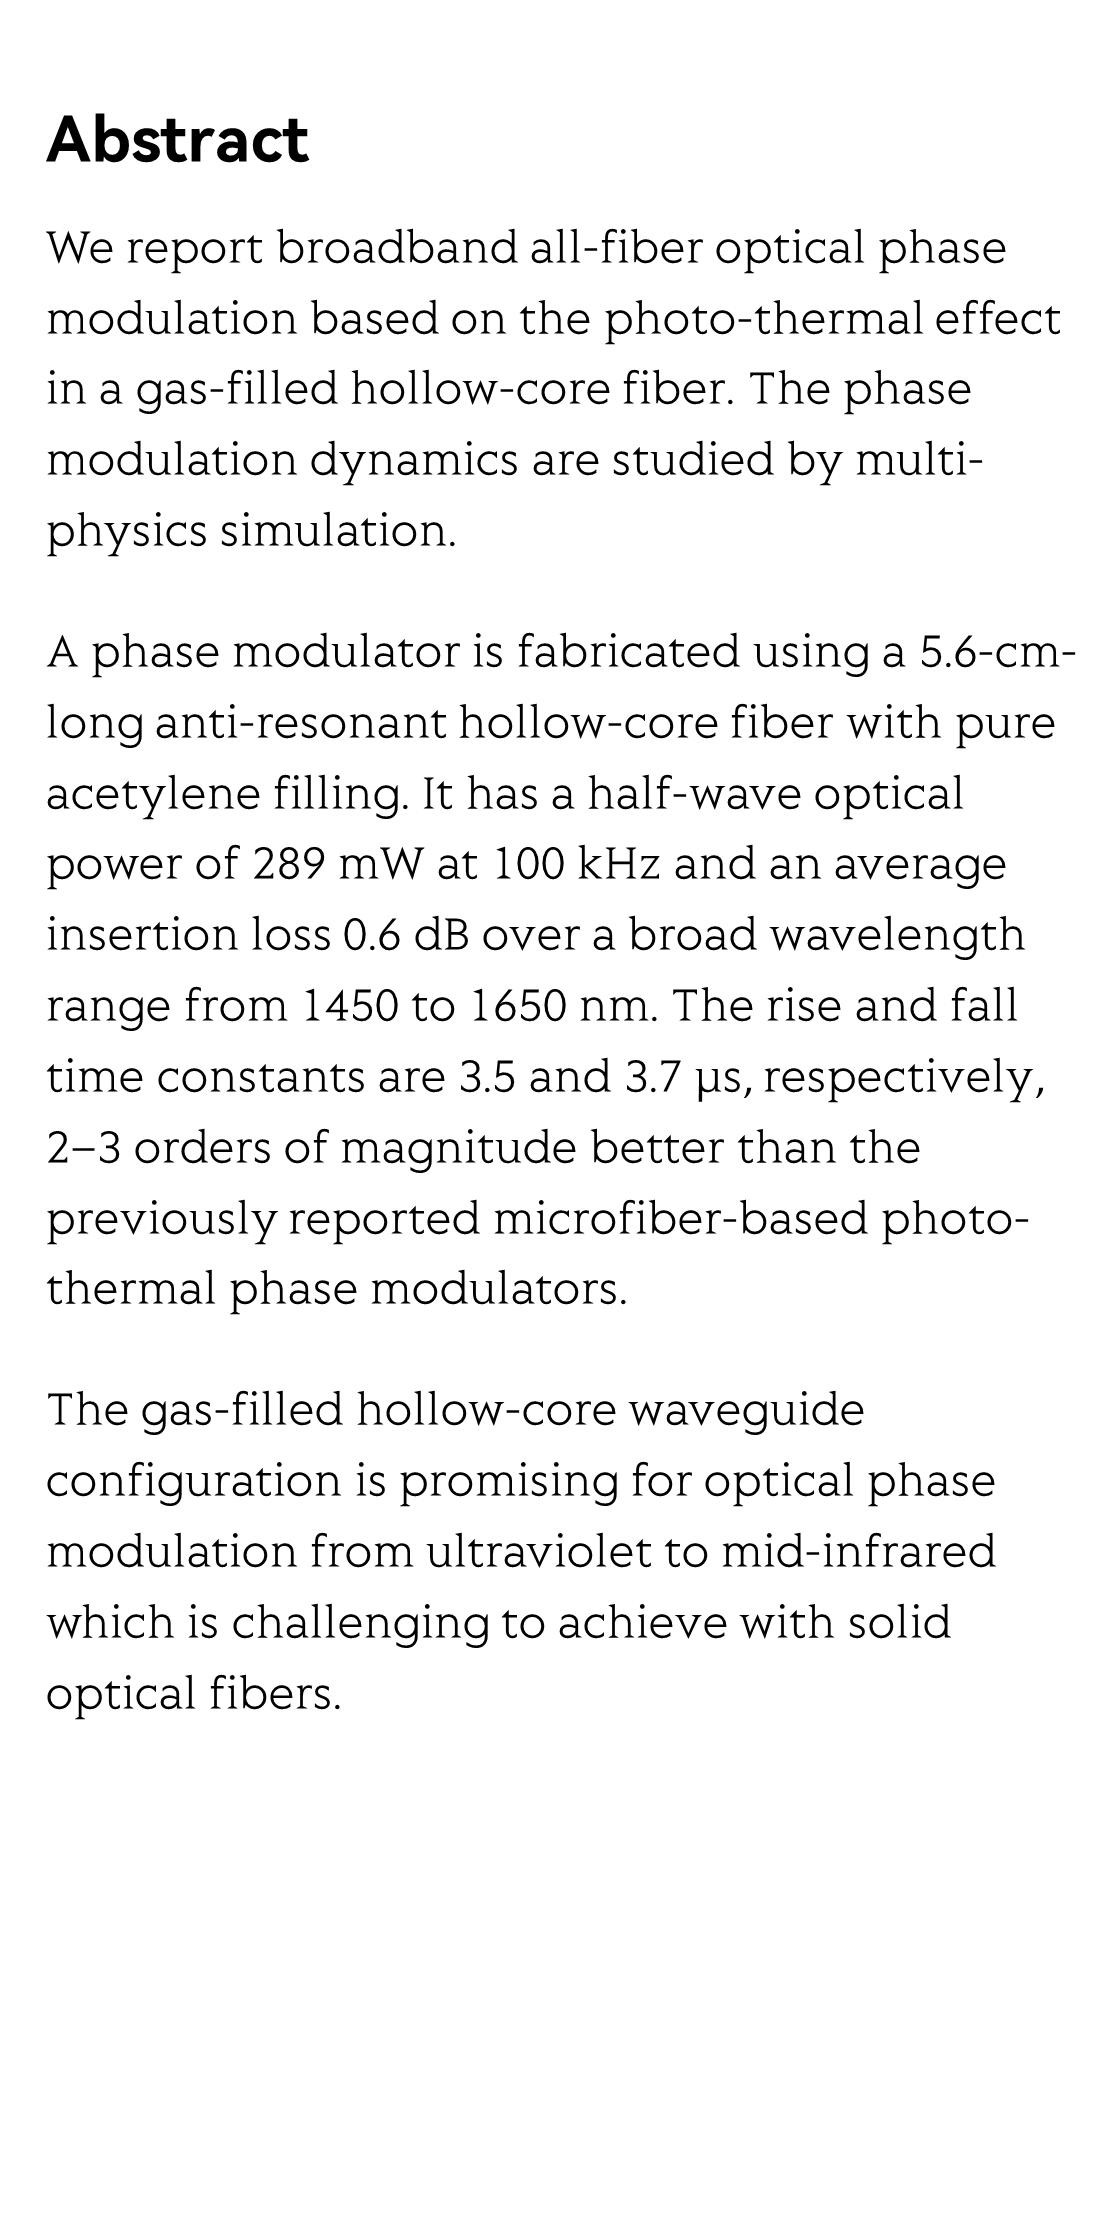 Broadband all-fiber optical phase modulator based on photo-thermal effect in a gas-filled hollow-core fiber_2